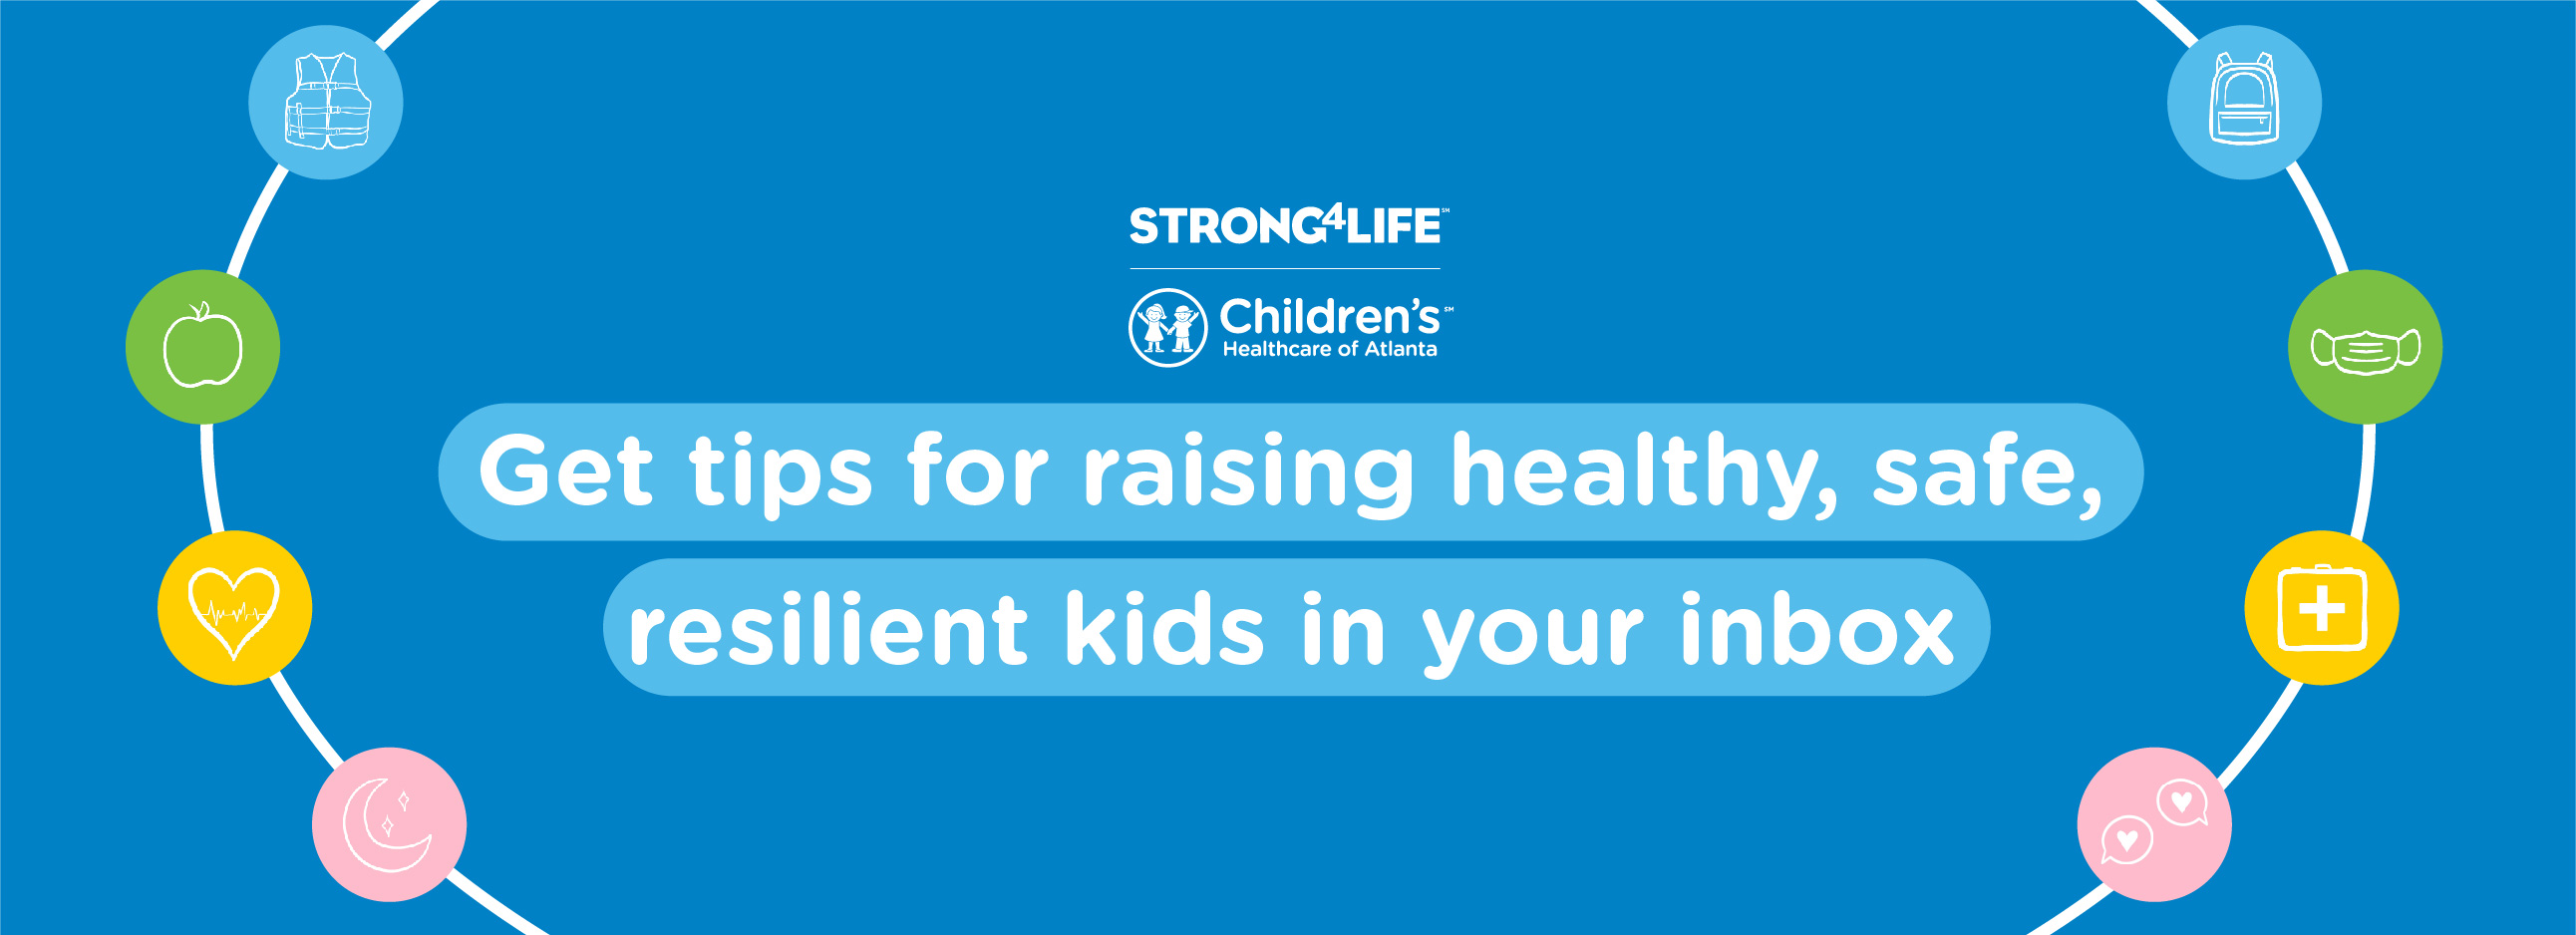 Get tips for raising healthy, safe resilients kids in your inbox